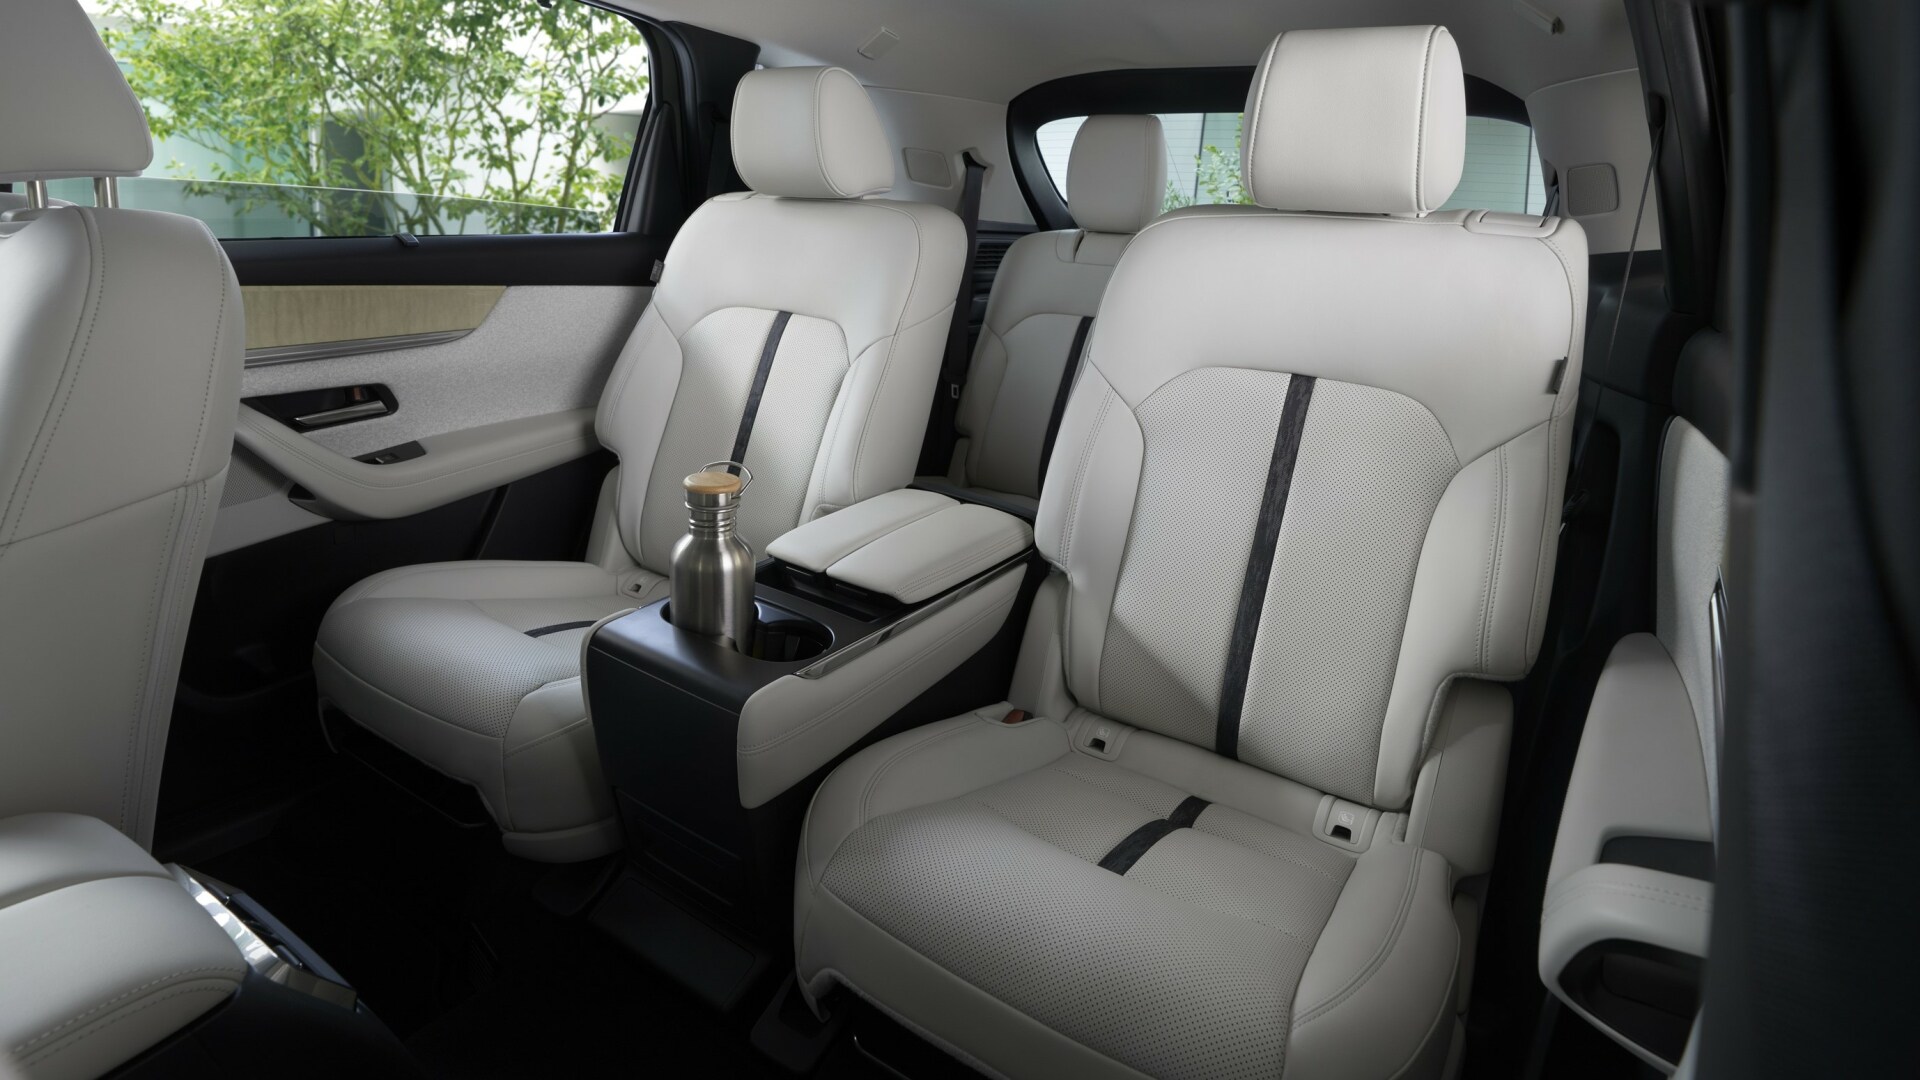 The Interior, And Second Row of Seats Of The Mazda CX-80 (Credits Mazda Newsroom)